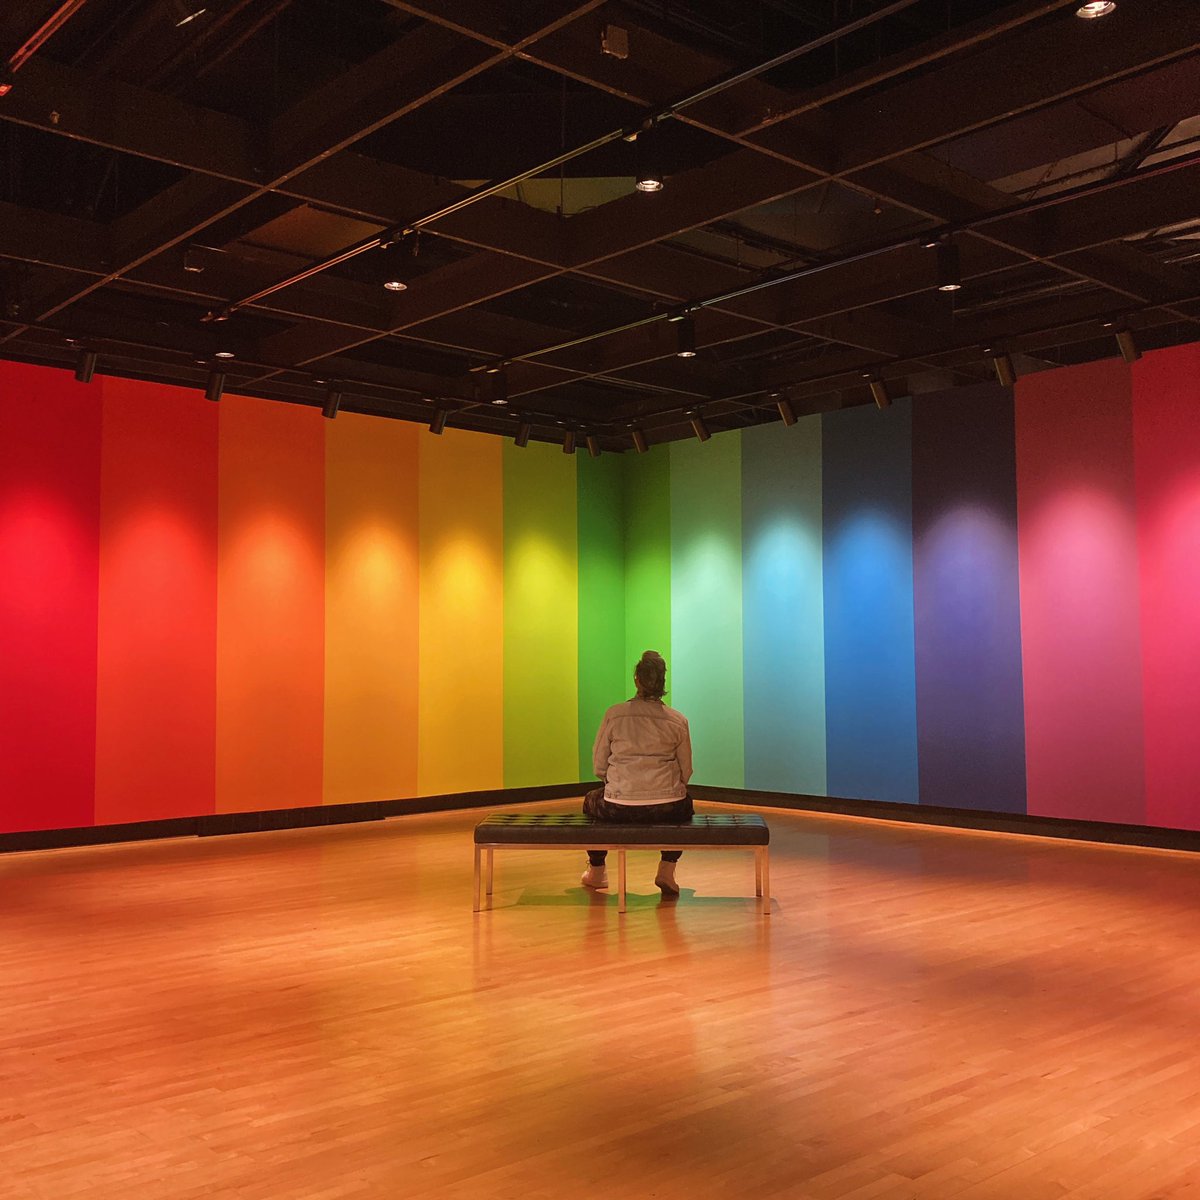 The exhibition “Lisa Marie Thalhammer: Chromatic Dialogue” is now on view through April 5 @UMDArtGallery. The in-gallery mural “Harmonic Color Balance” (2024) is spectacular. See it in person before it’s gone forever! #artsforall #umd 🖼️ 🏳️‍🌈 🐢